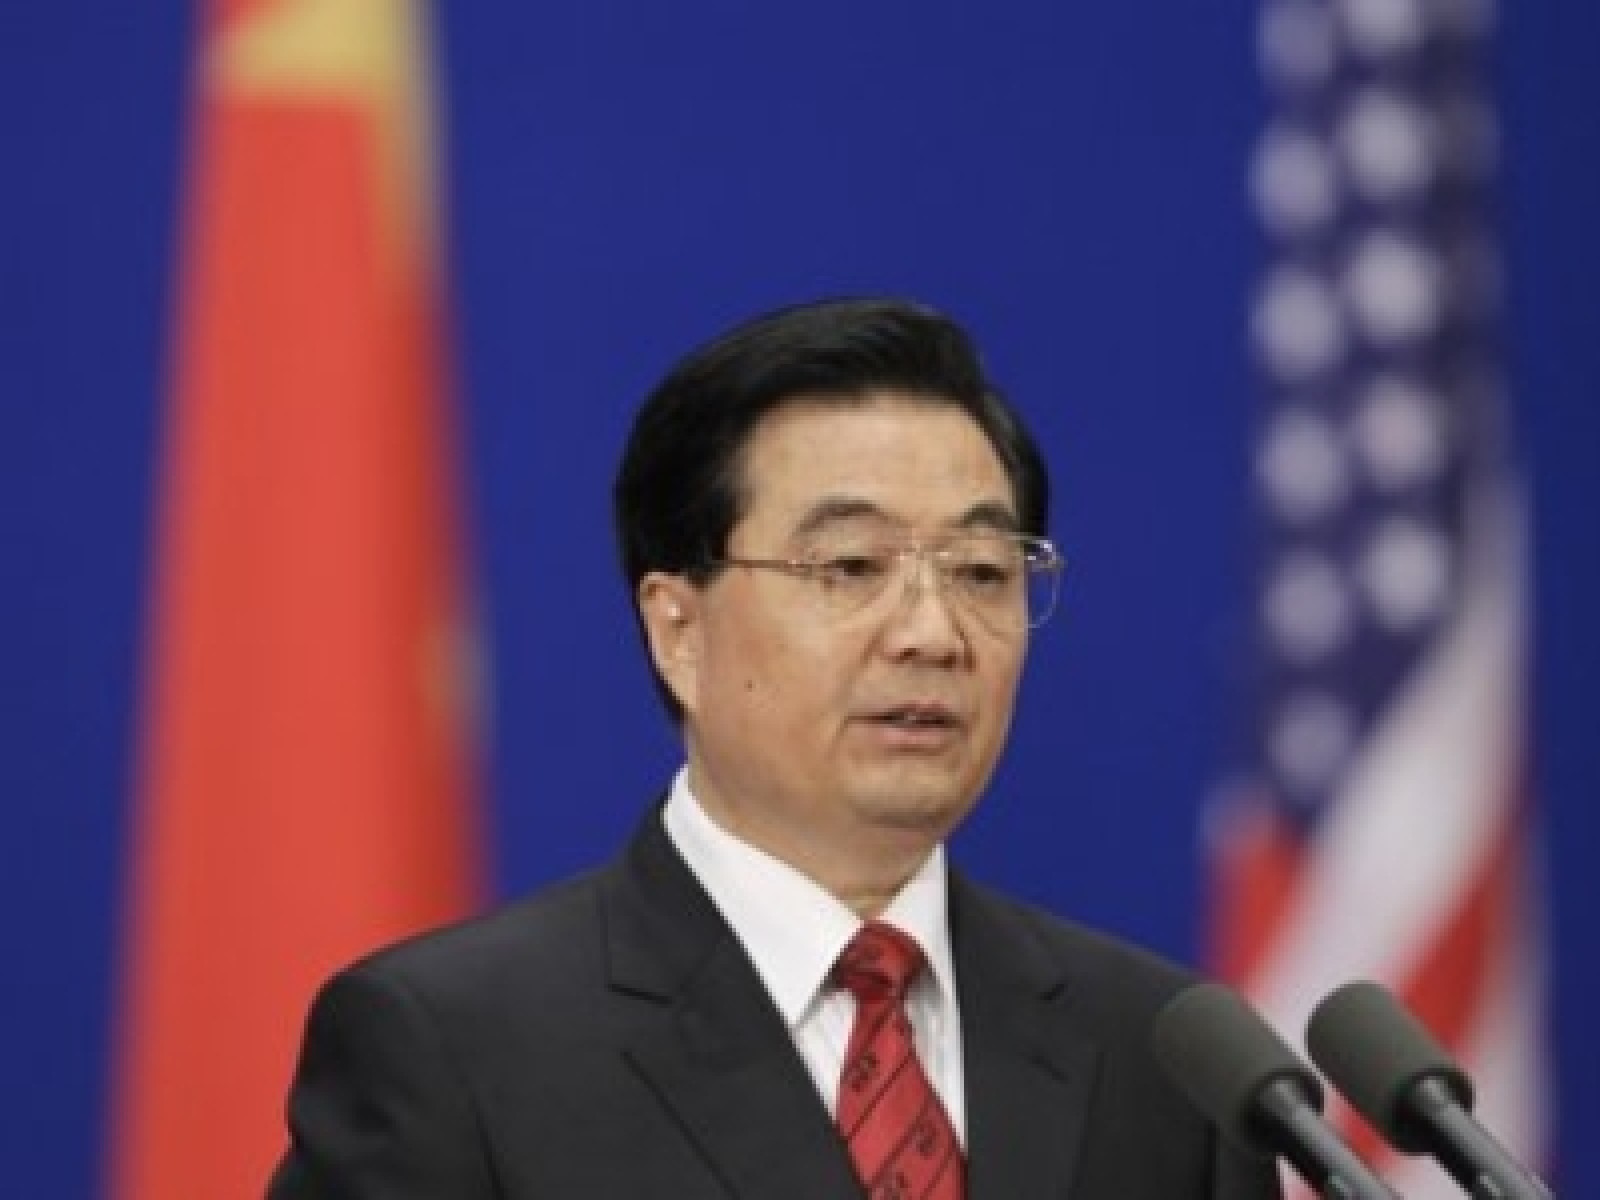 Who’s Hu? 10 facts about China’s Hu Jintao WBEZ Chicago